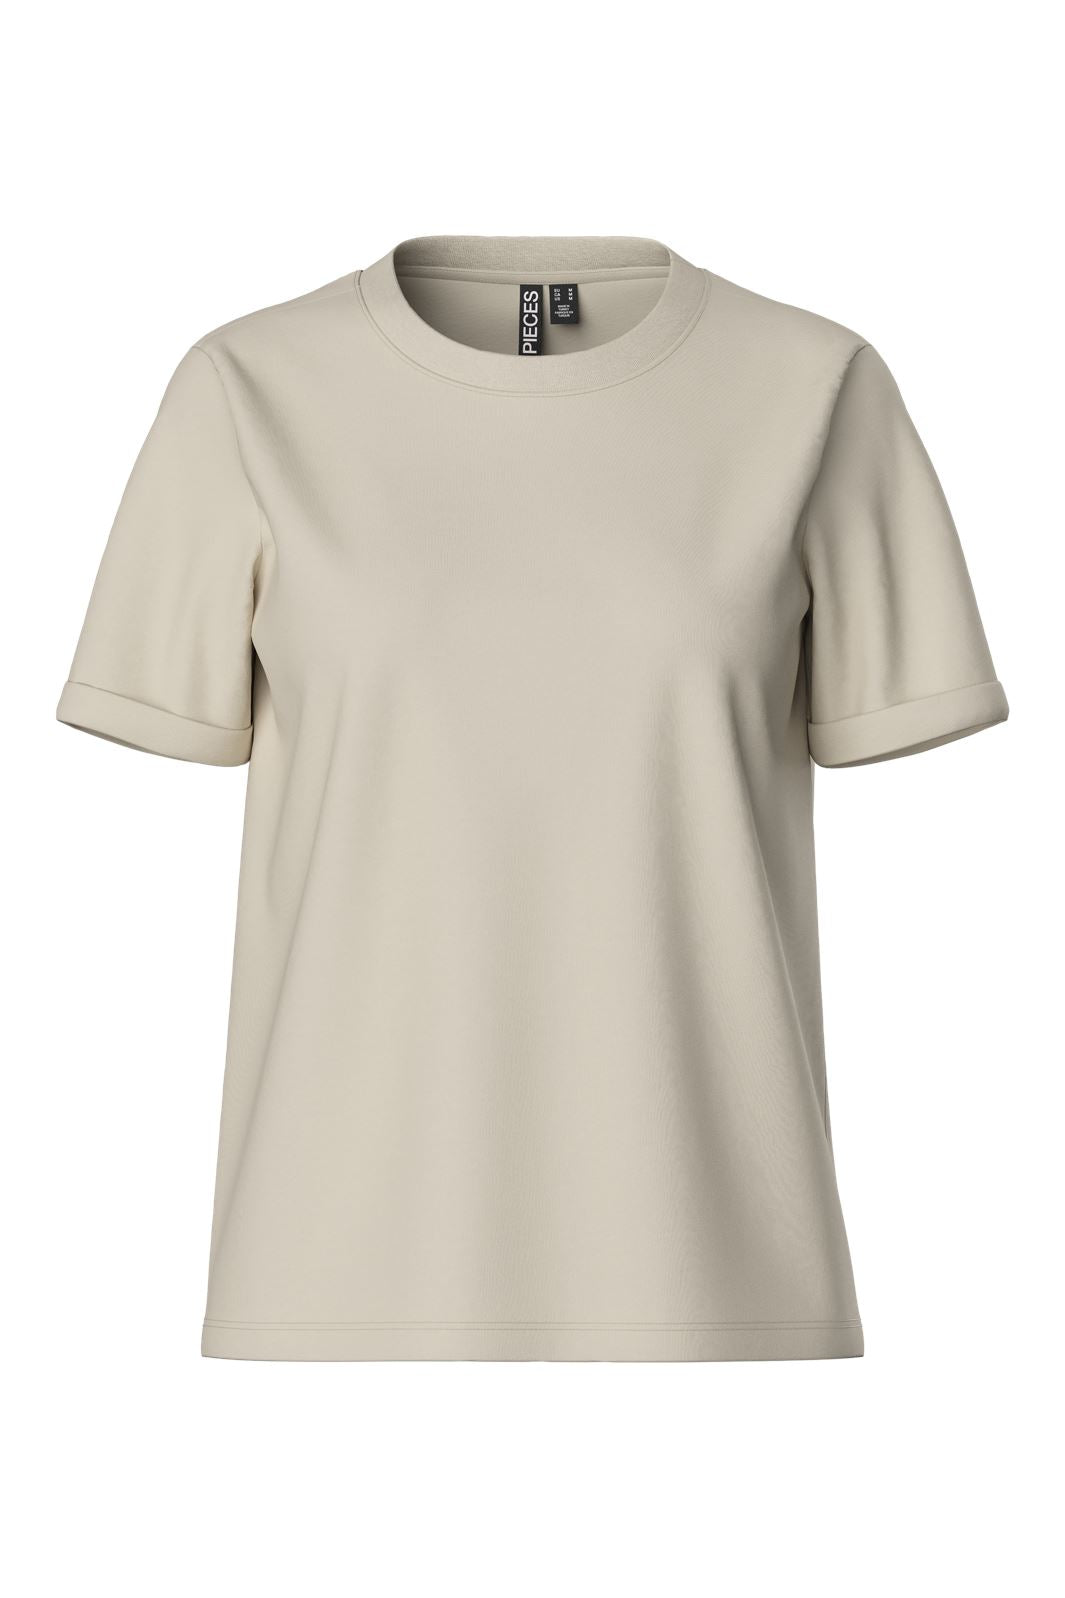 Pieces - Pcria Ss Fold Up Solid Tee - 3591265 Birch